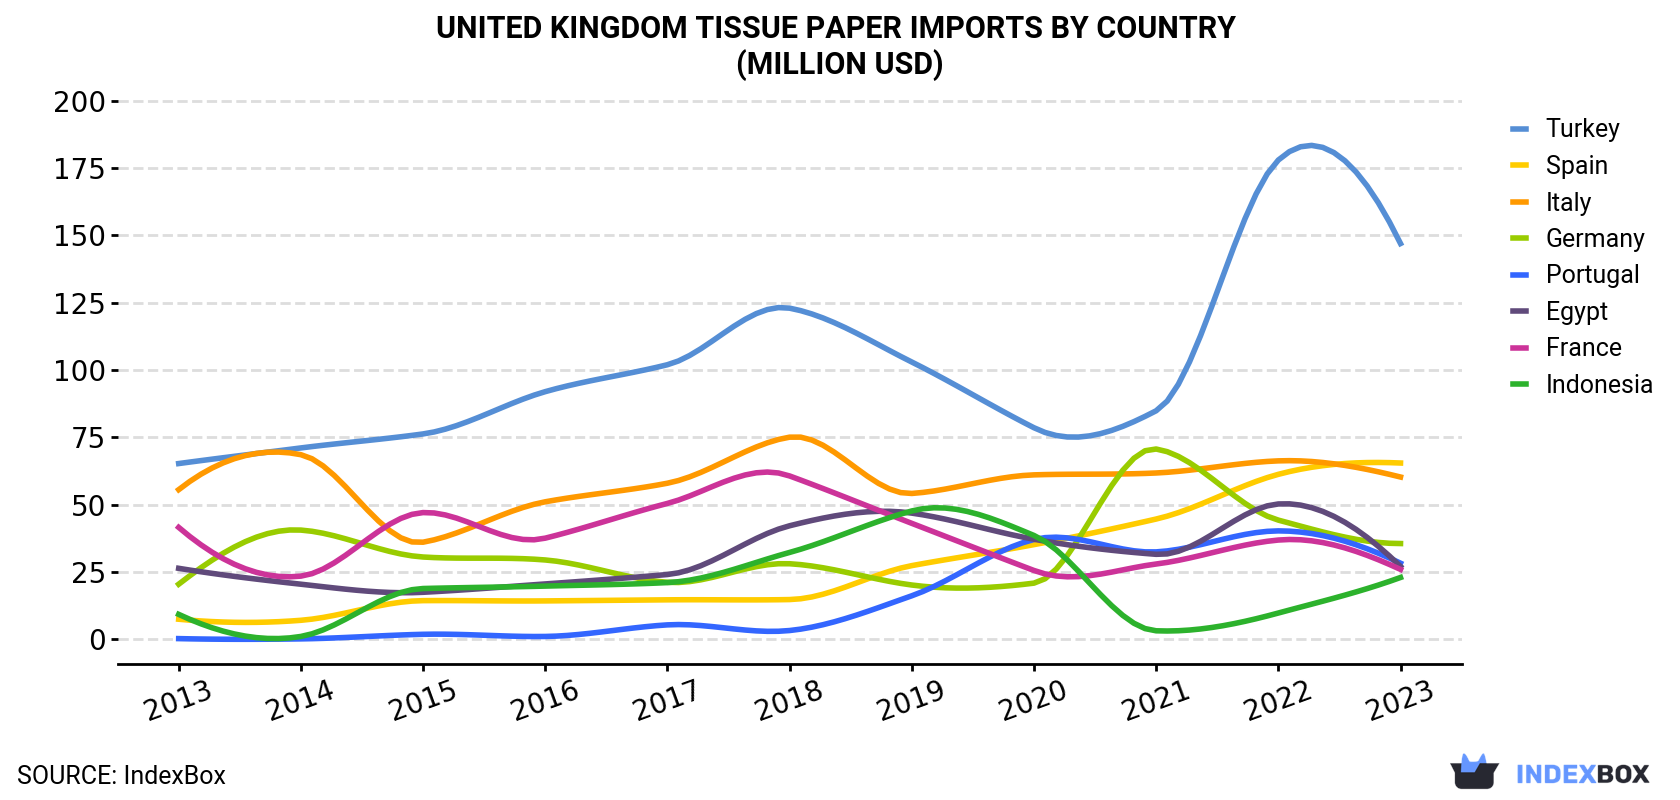 United Kingdom Tissue Paper Imports By Country (Million USD)